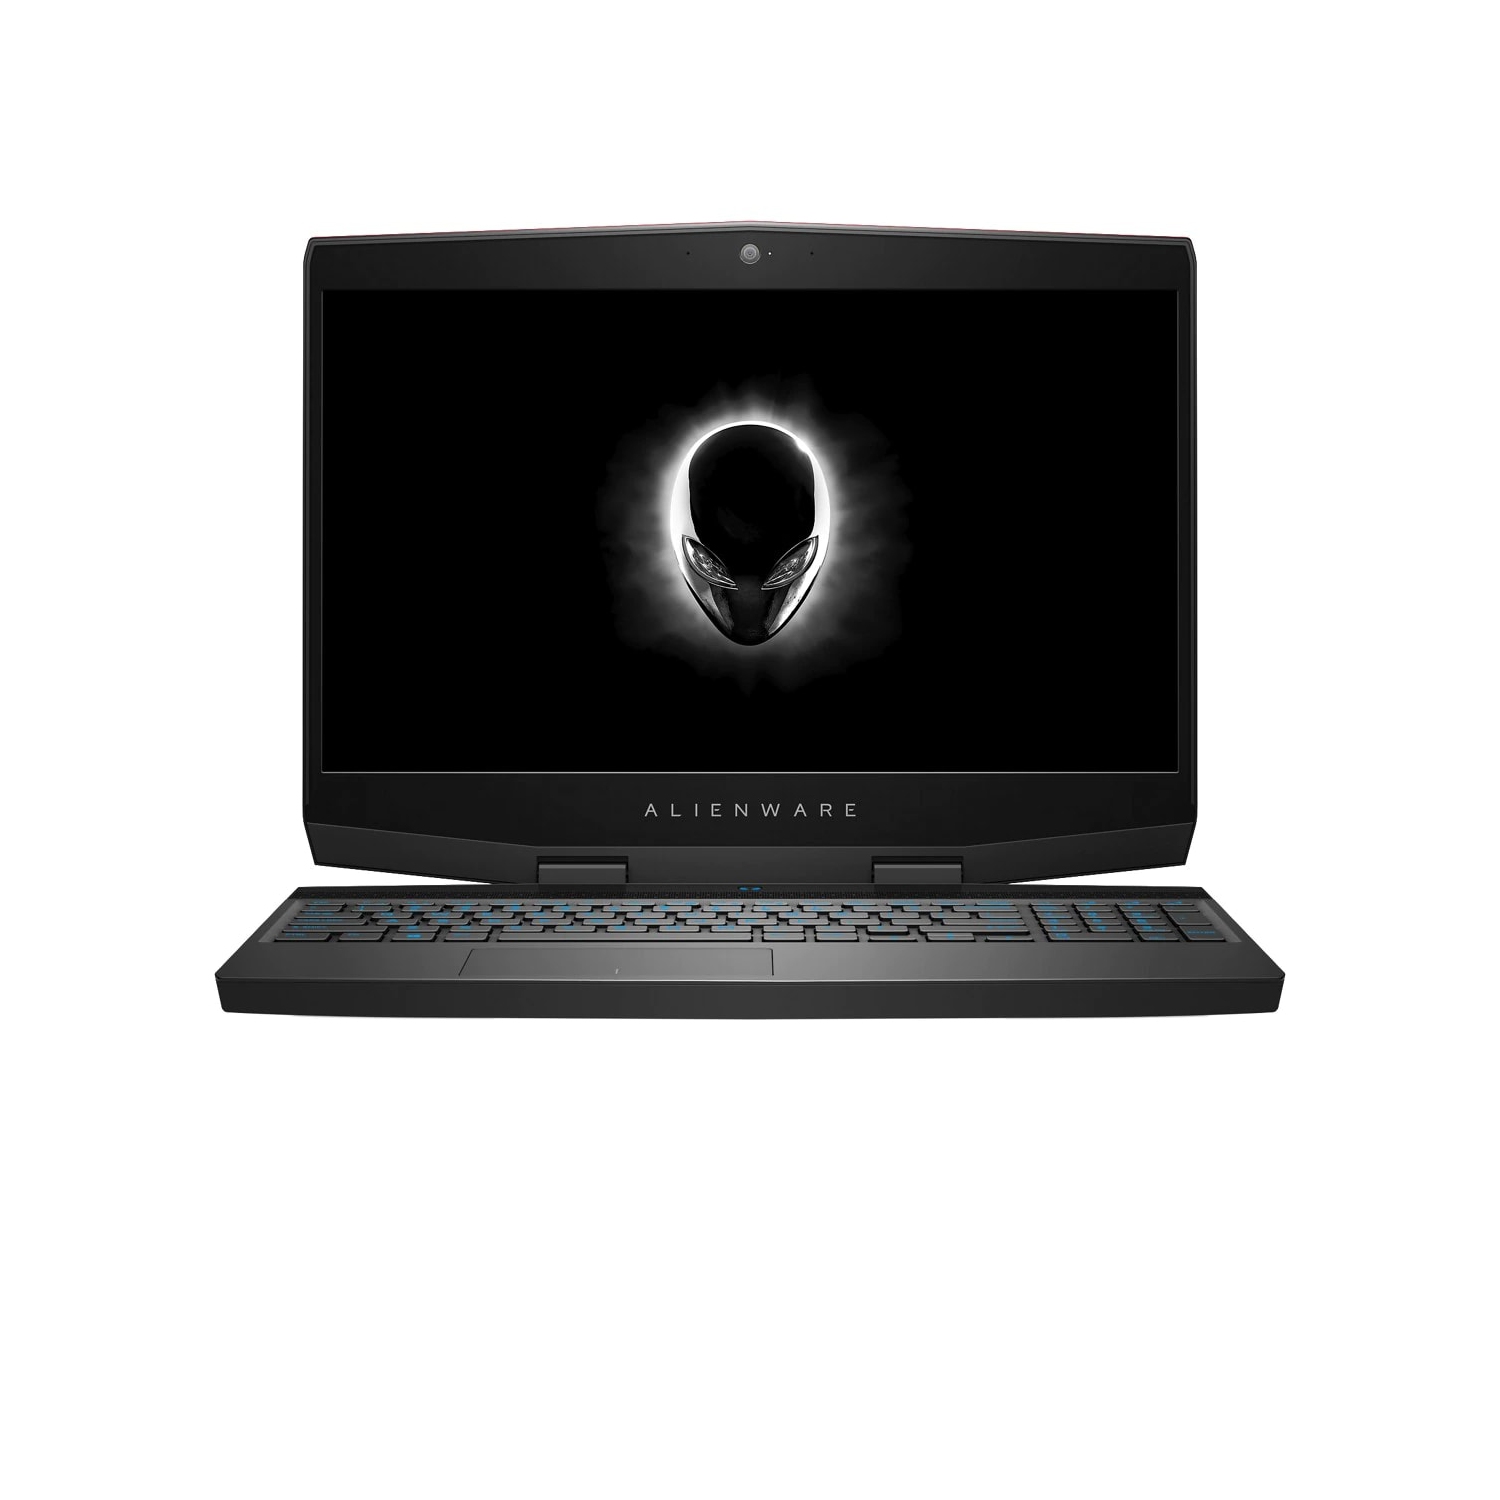 Refurbished (Excellent) - Dell Alienware m15 Gaming Laptop (2018) | 15.6" FHD | Core i7 - 512GB SSD - 16GB RAM - 1660 Ti | 6 Cores @ 4.1 GHz Certified Refurbished